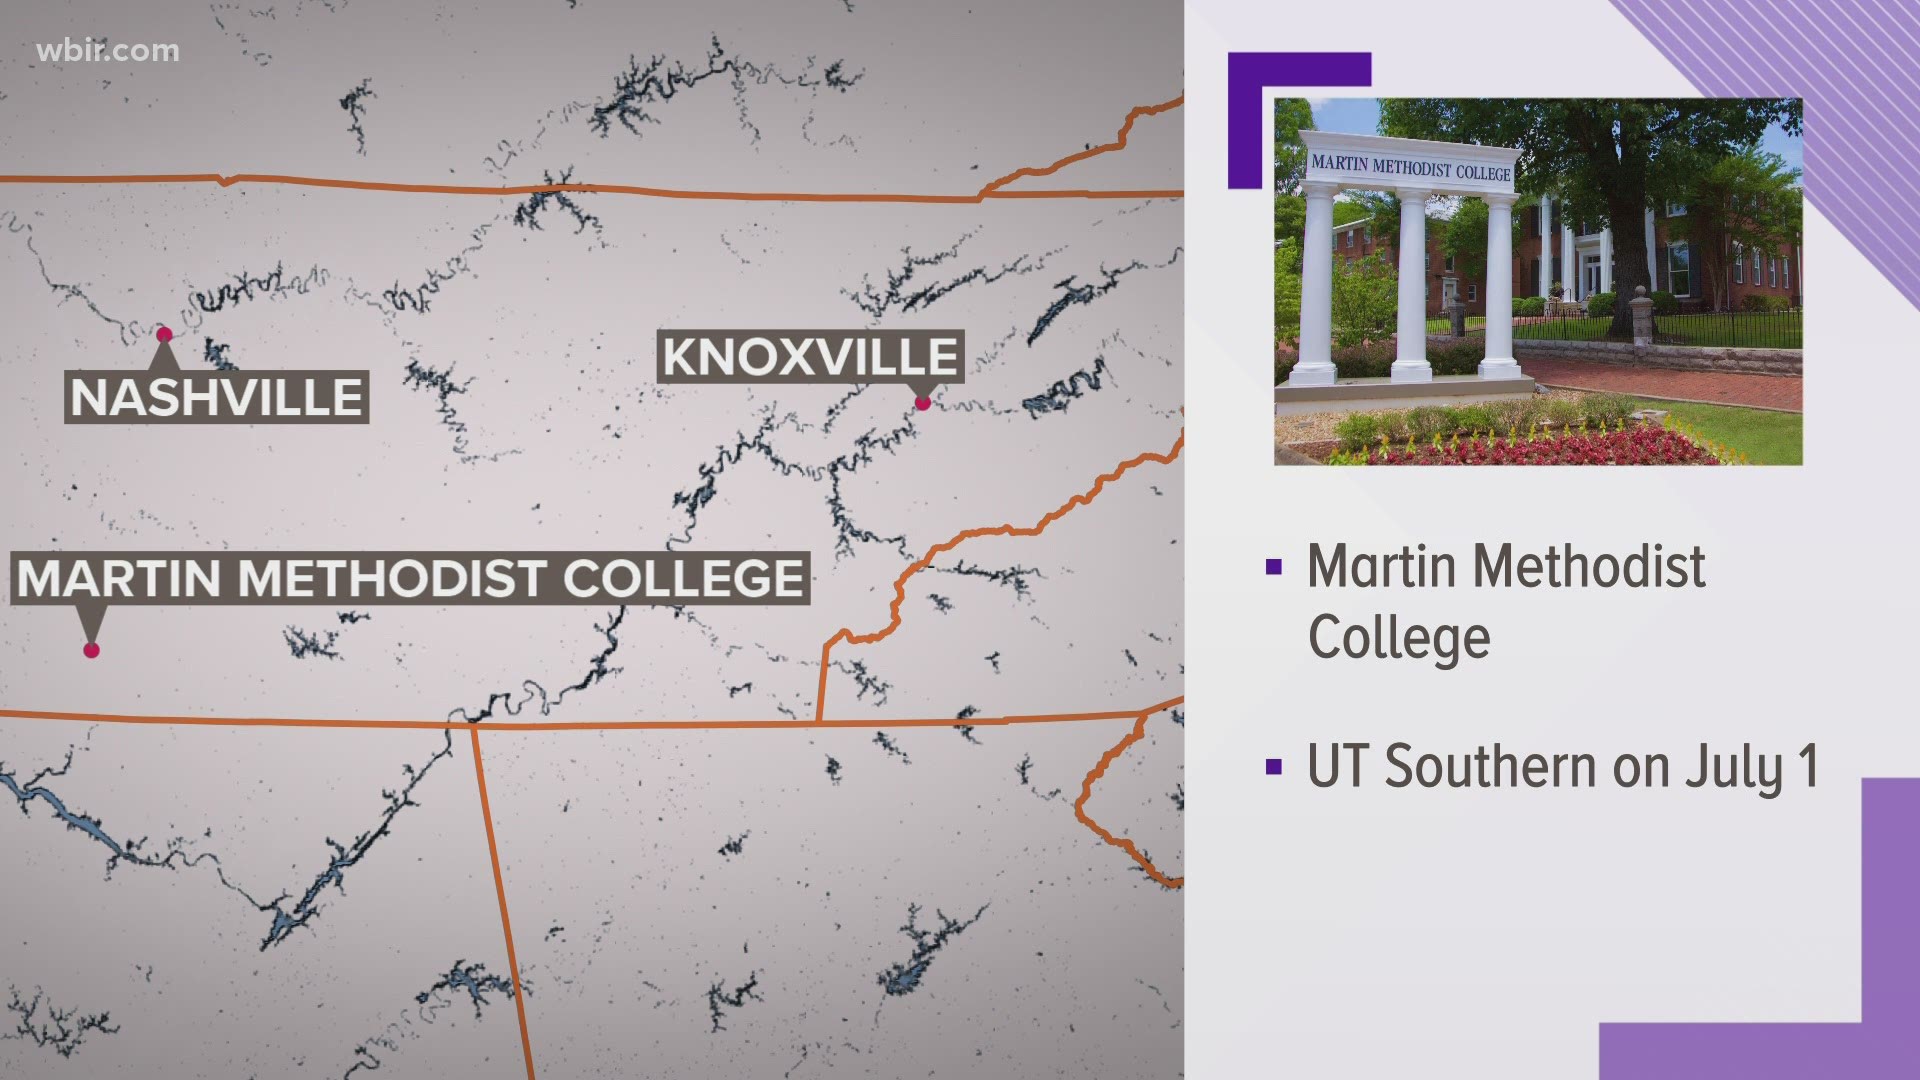 The University of Tennessee is establishing a new campus in Pulaski — UT Southern. It's around 73 miles south of Nashville.